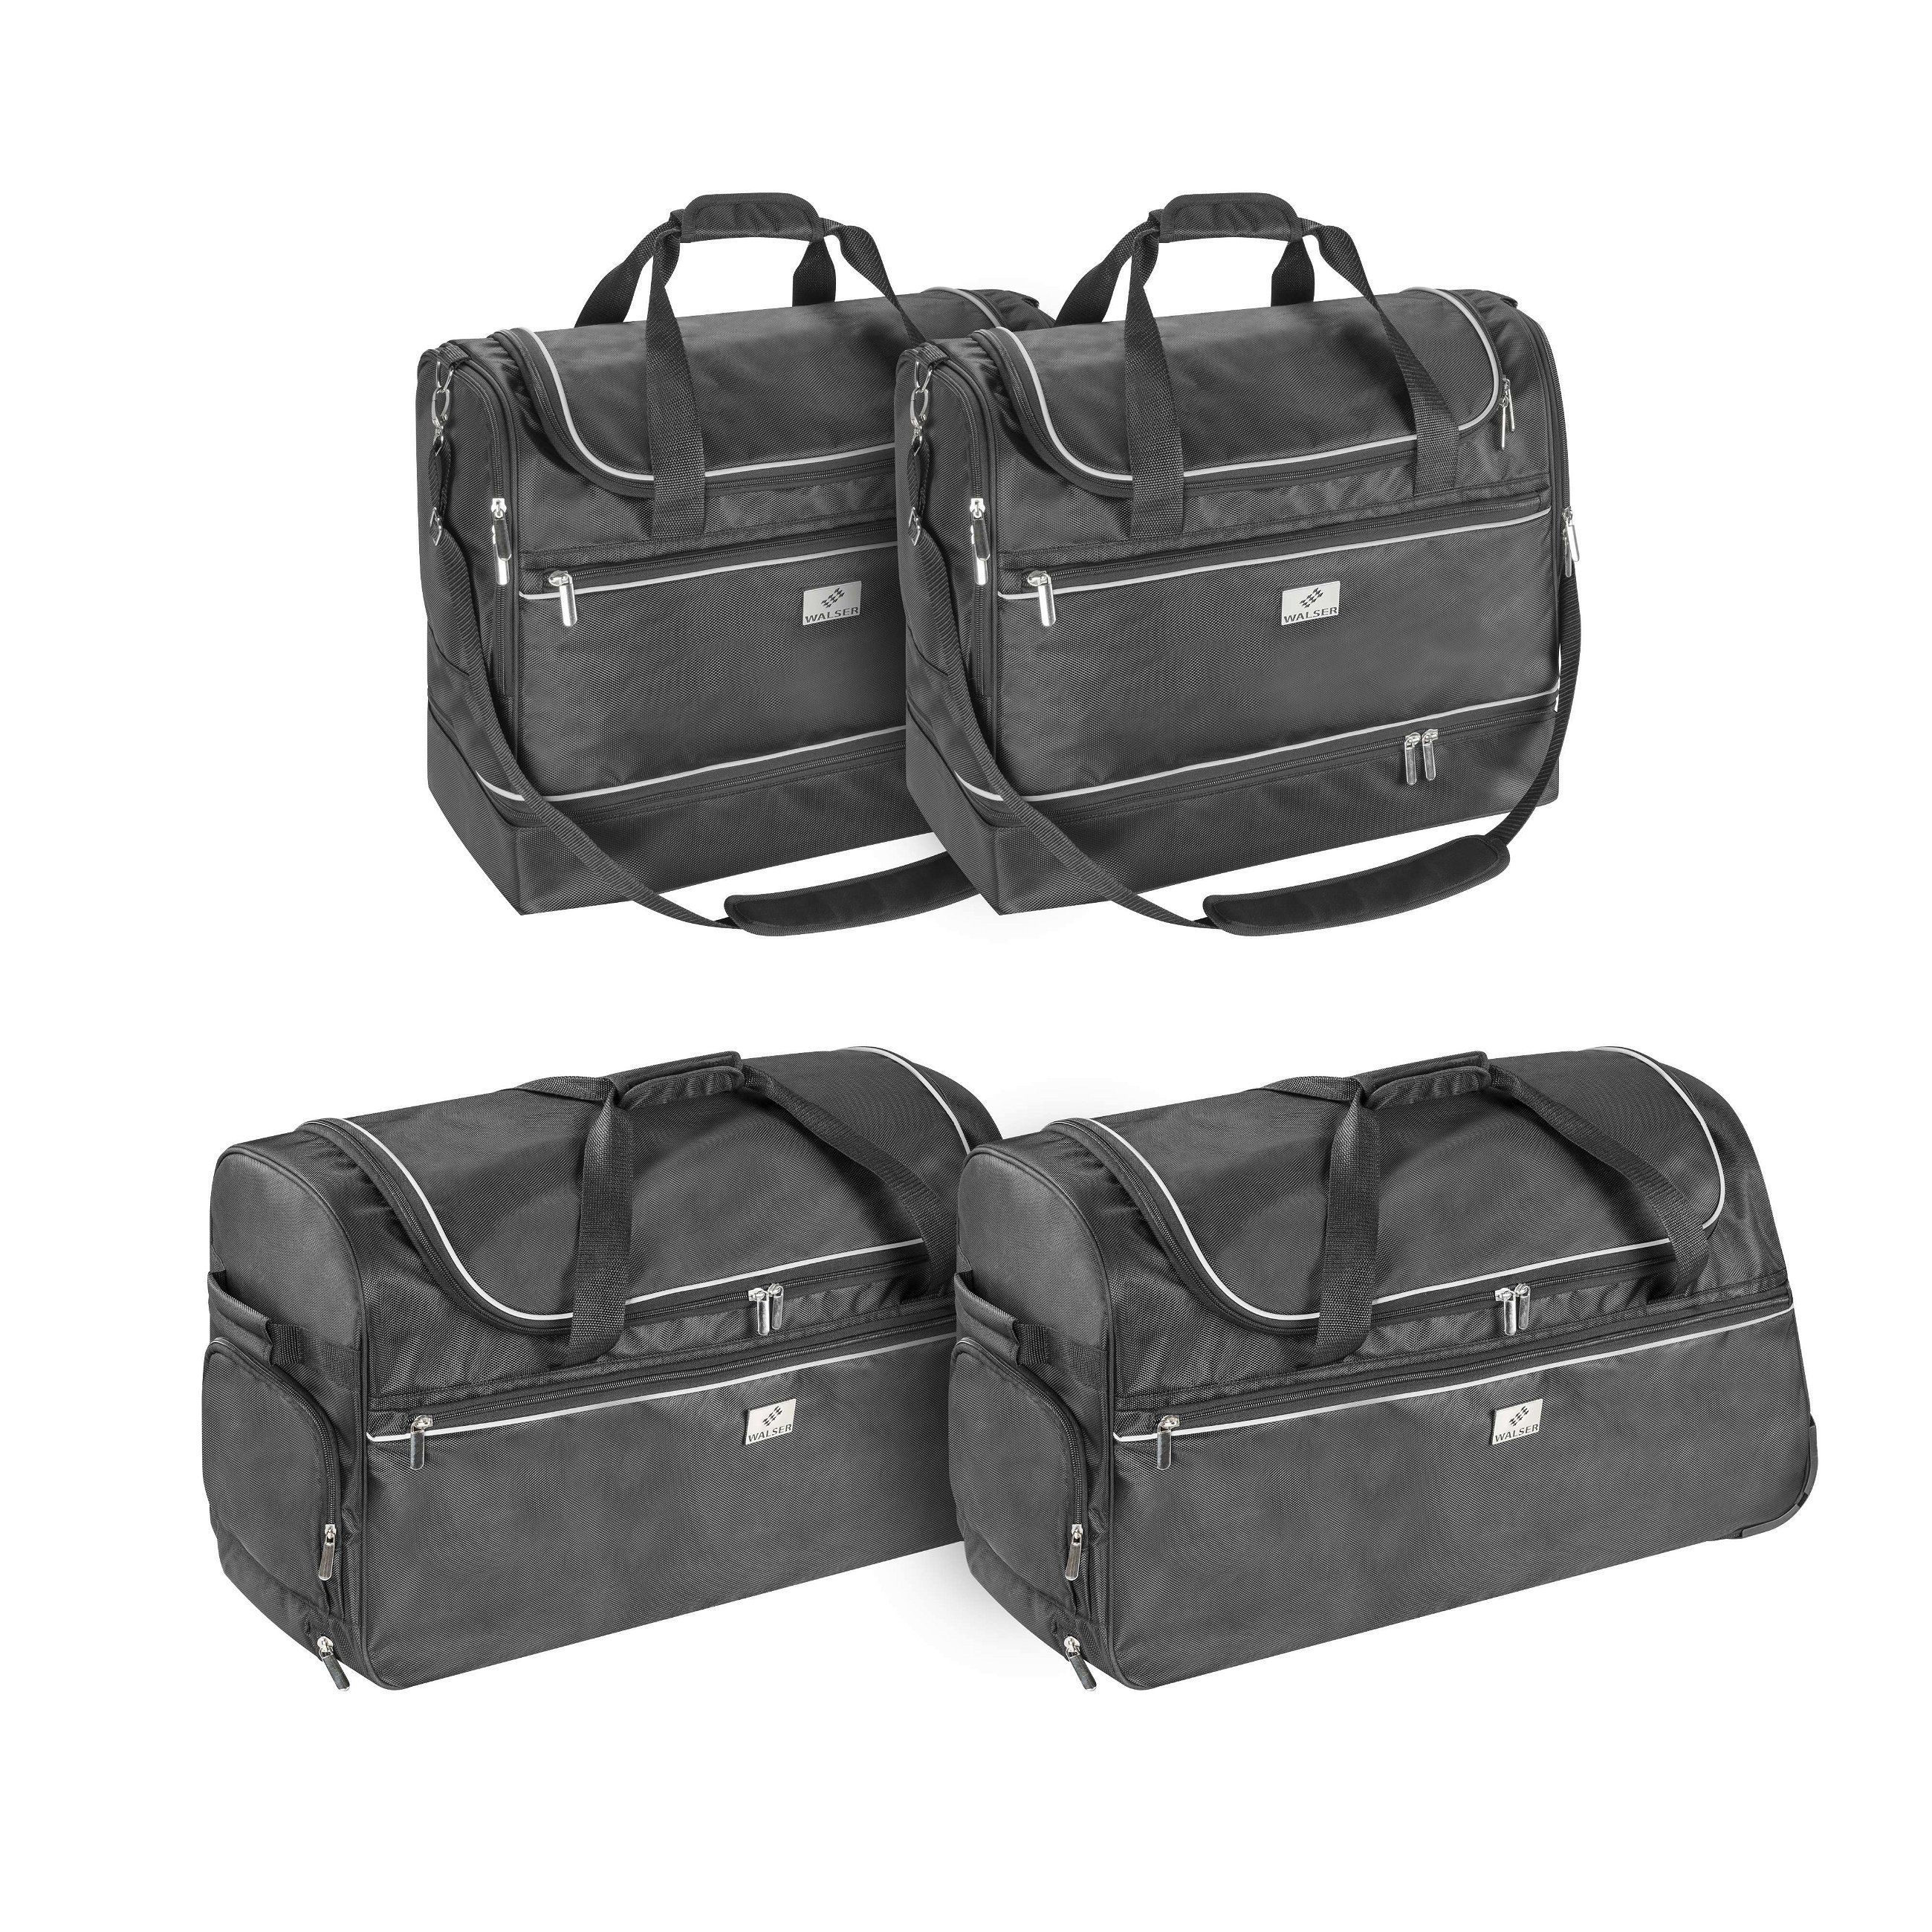 Carbags Travel Bag Set for BMW X1 II black